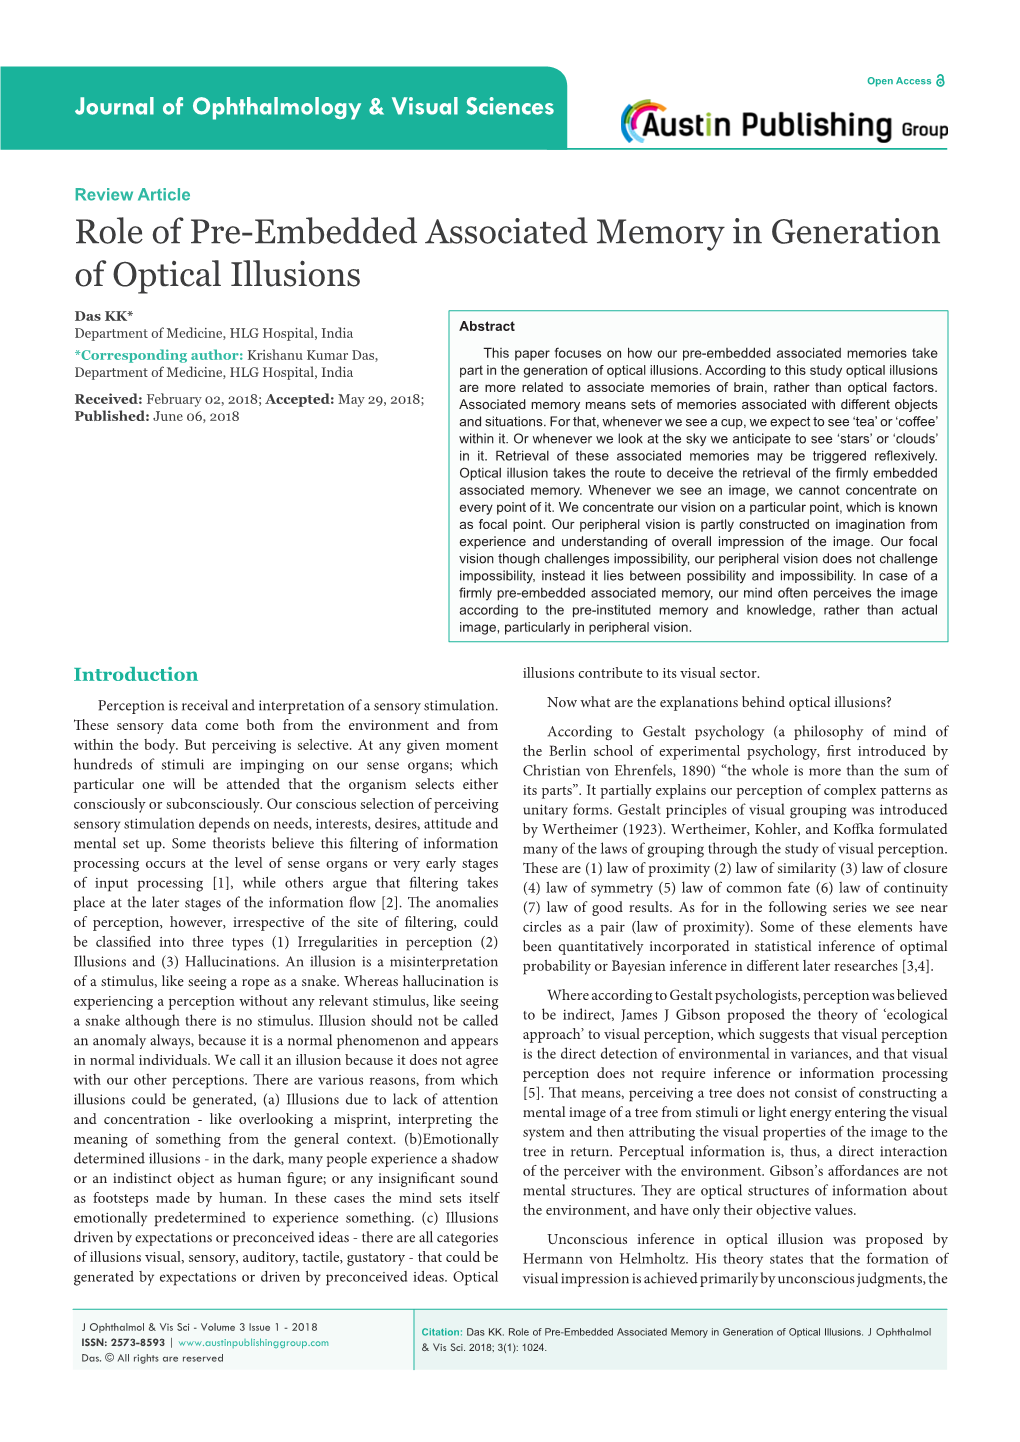 Role of Pre-Embedded Associated Memory in Generation of Optical Illusions